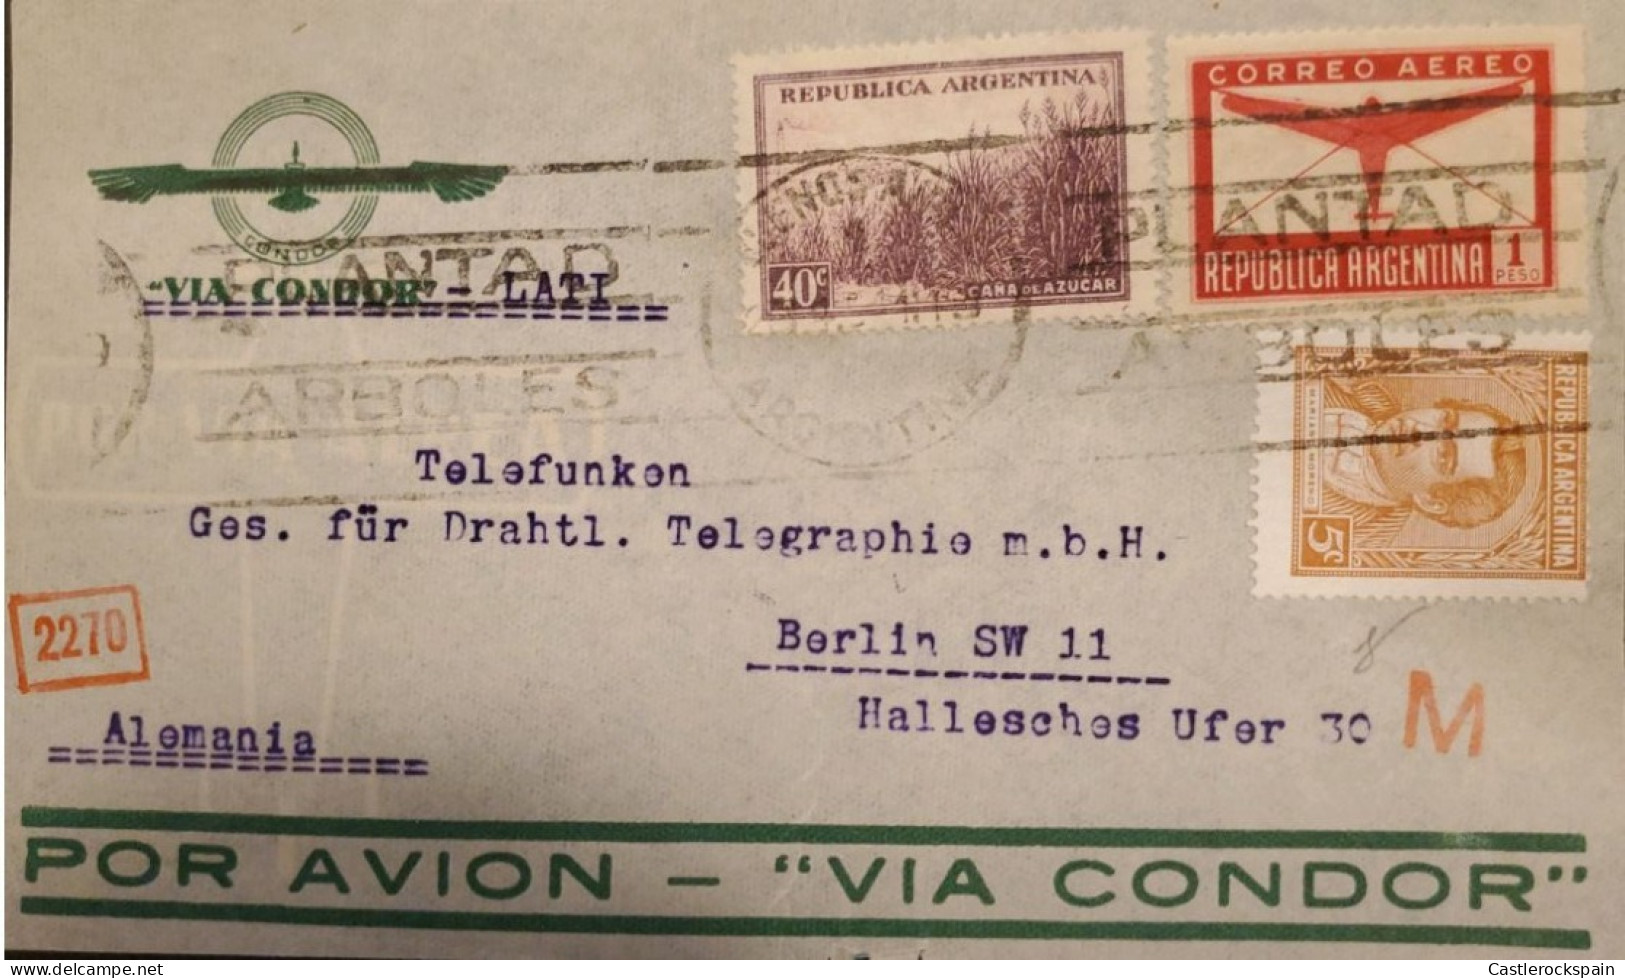 MI) 1936-42, ARGENTINA, AIR MAIL, VIA CONDOR, FROM BUENOS AIRES TO GERMANY, WITH CANCELLATION SLOGAN, MARIANO MORENO STA - Usados